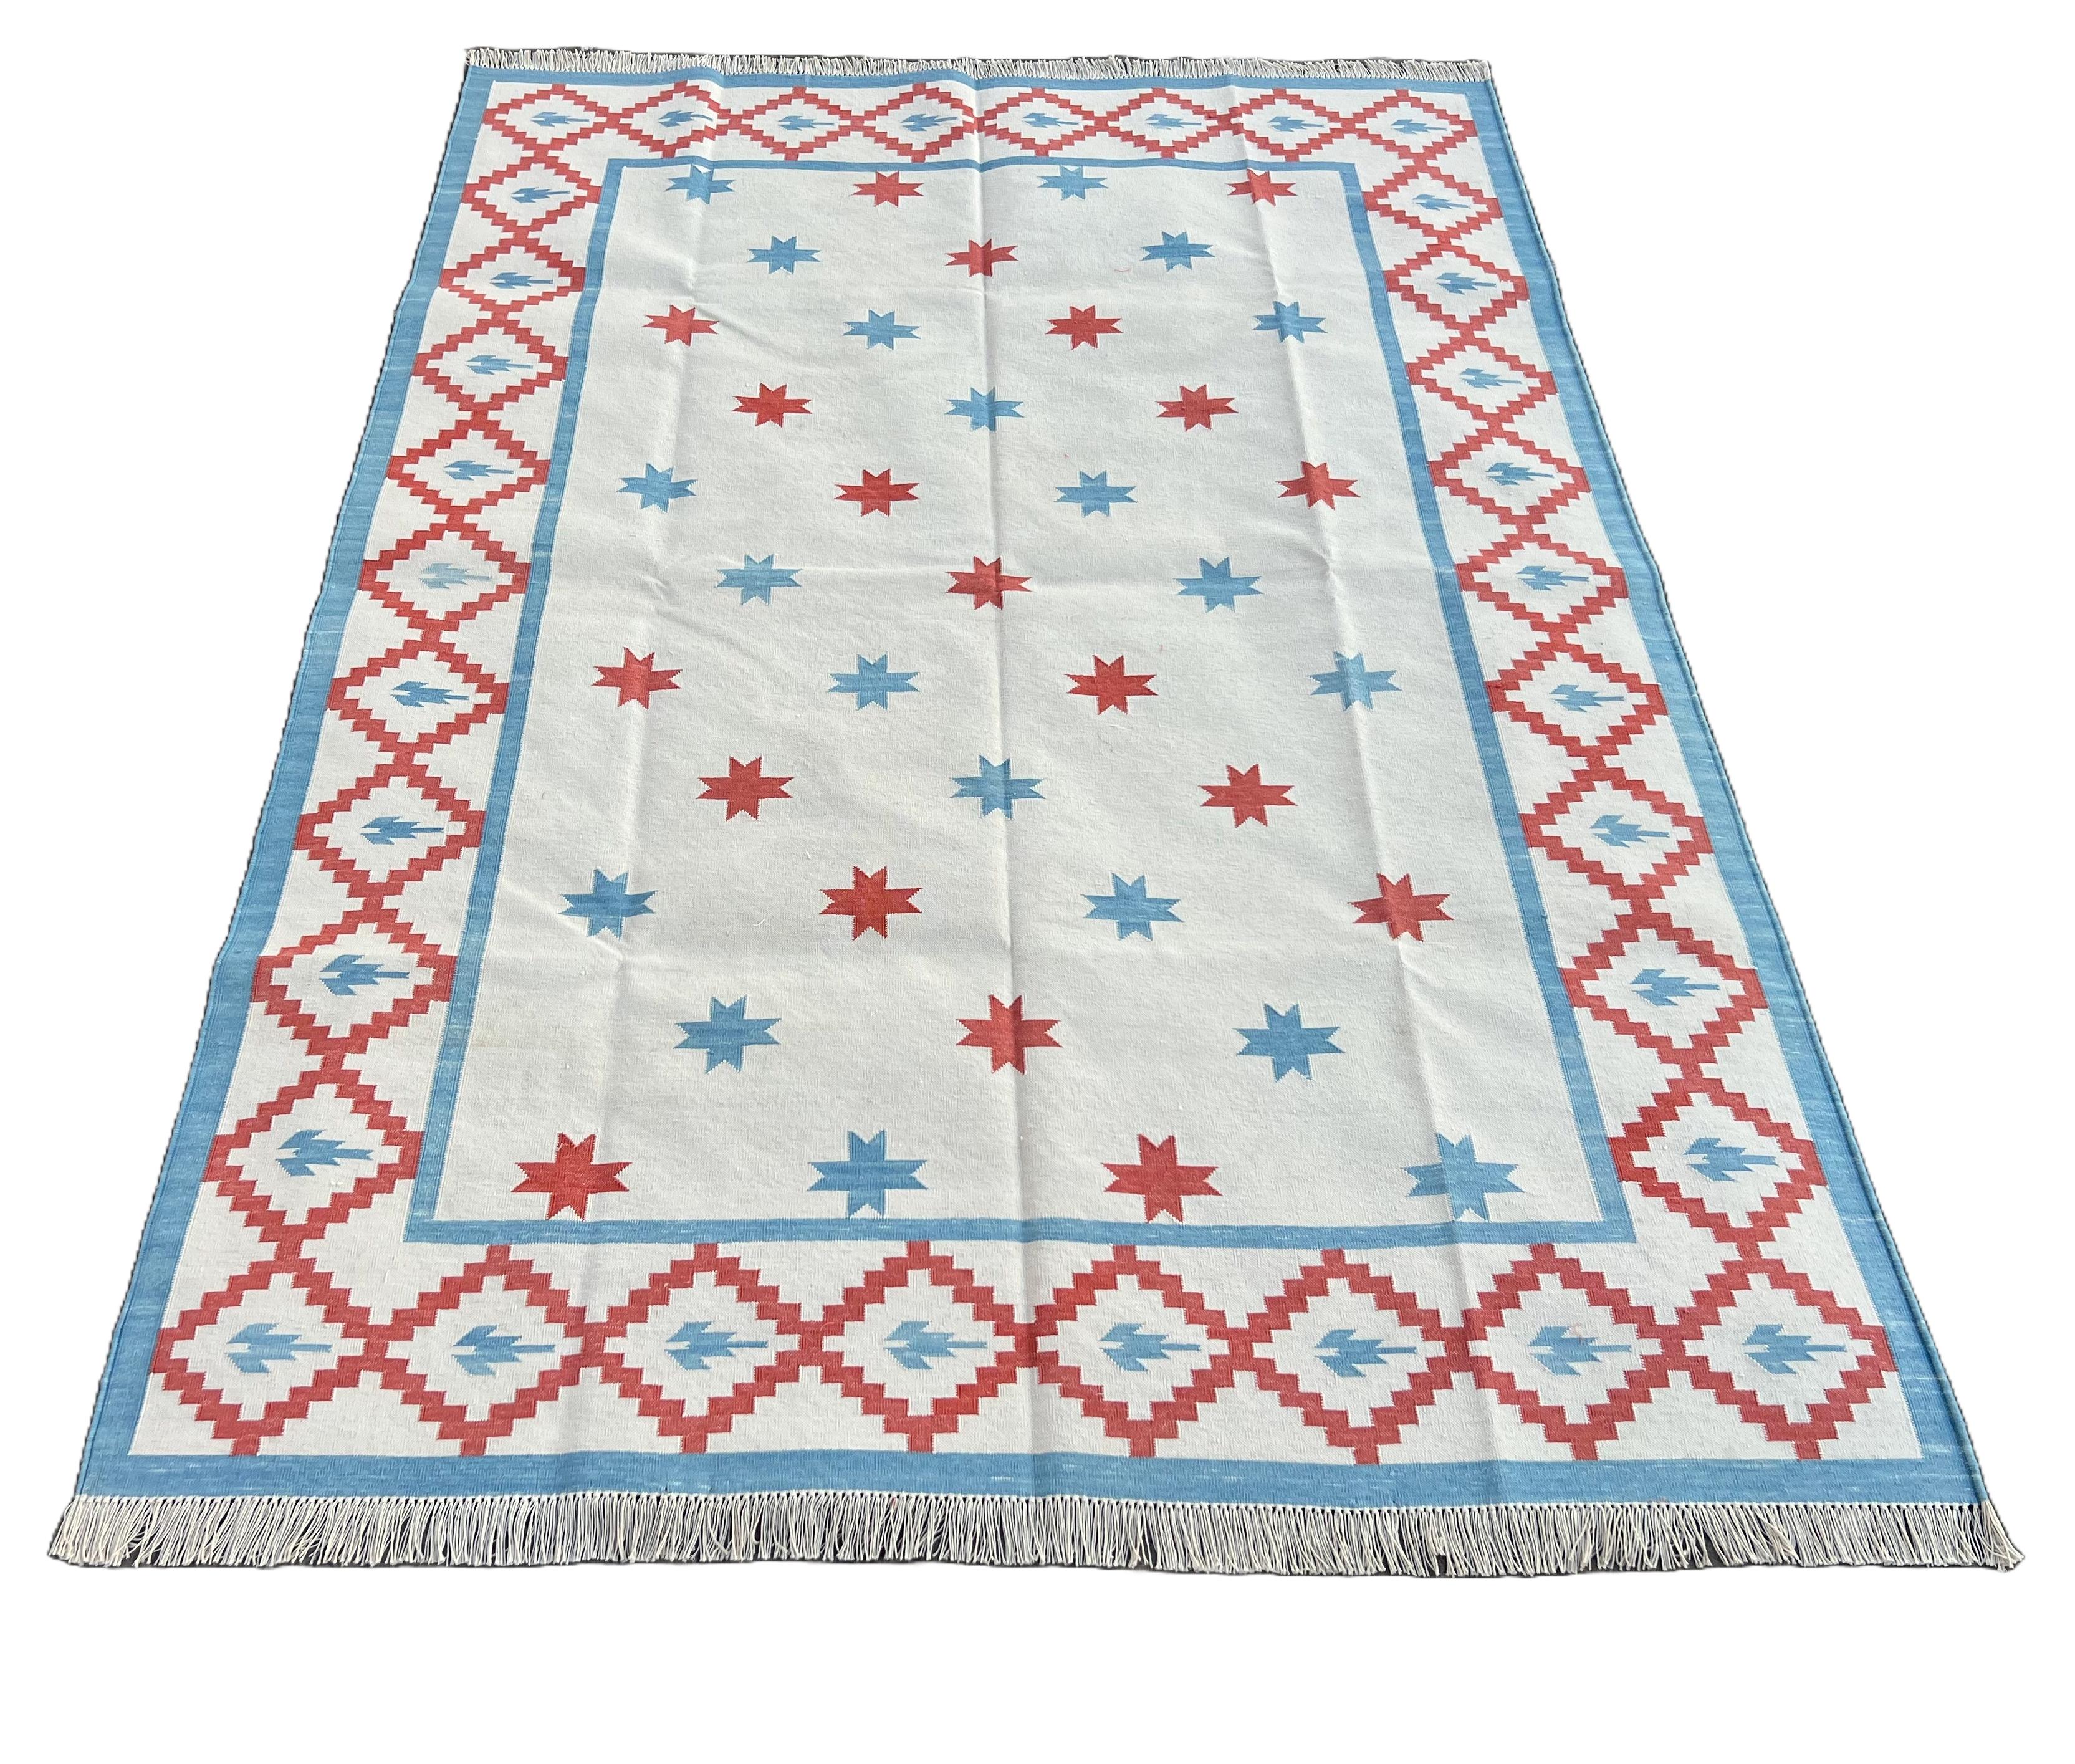 Contemporary Handmade Cotton Area Flat Weave Rug, 5x7 Cream And Blue Star Indian Dhurrie Rug For Sale